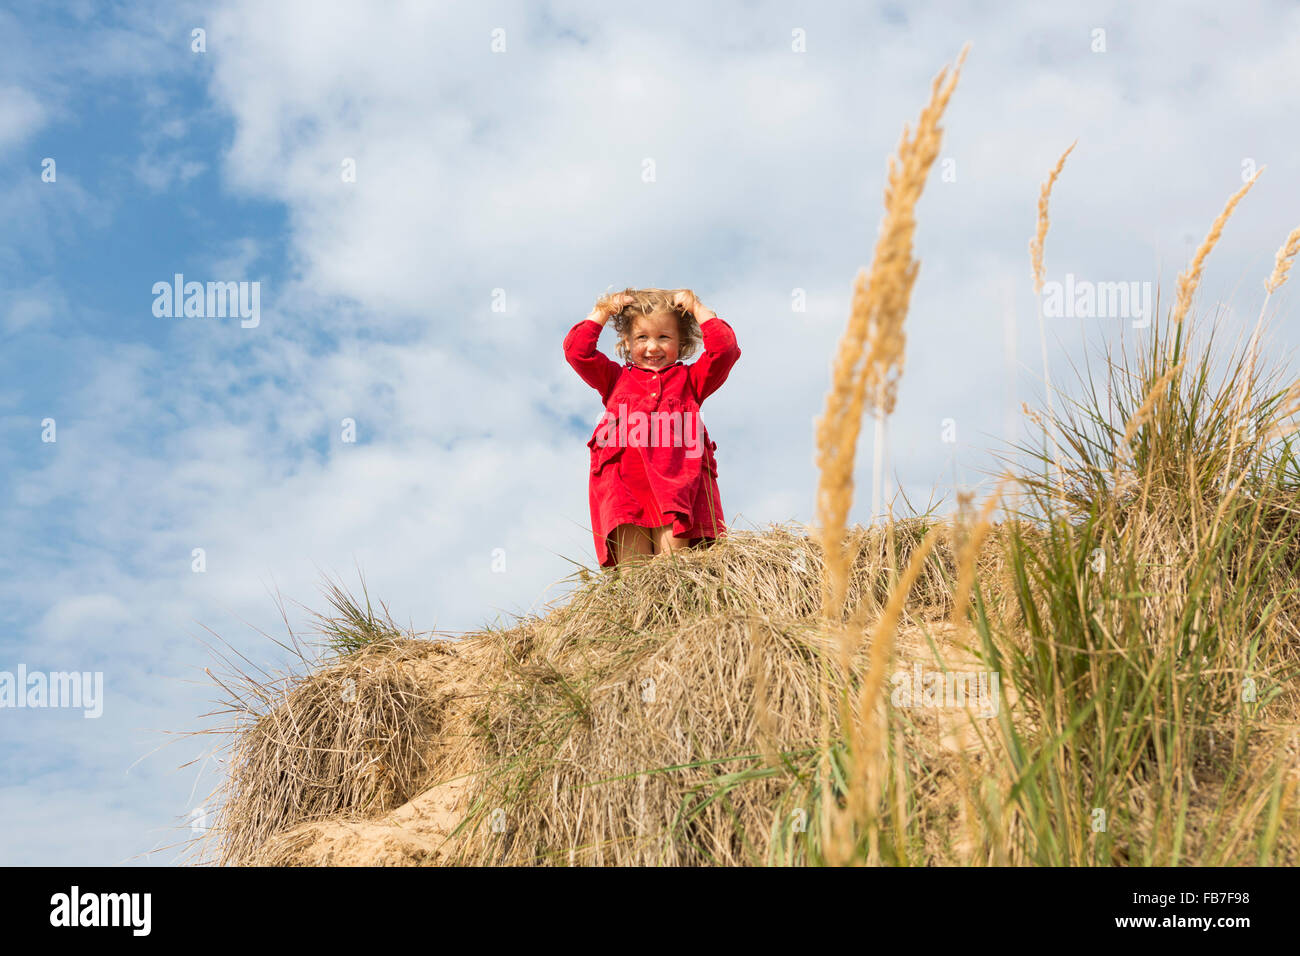 Low angle portrait of girl holding hair while standing on sand dune against sky Stock Photo